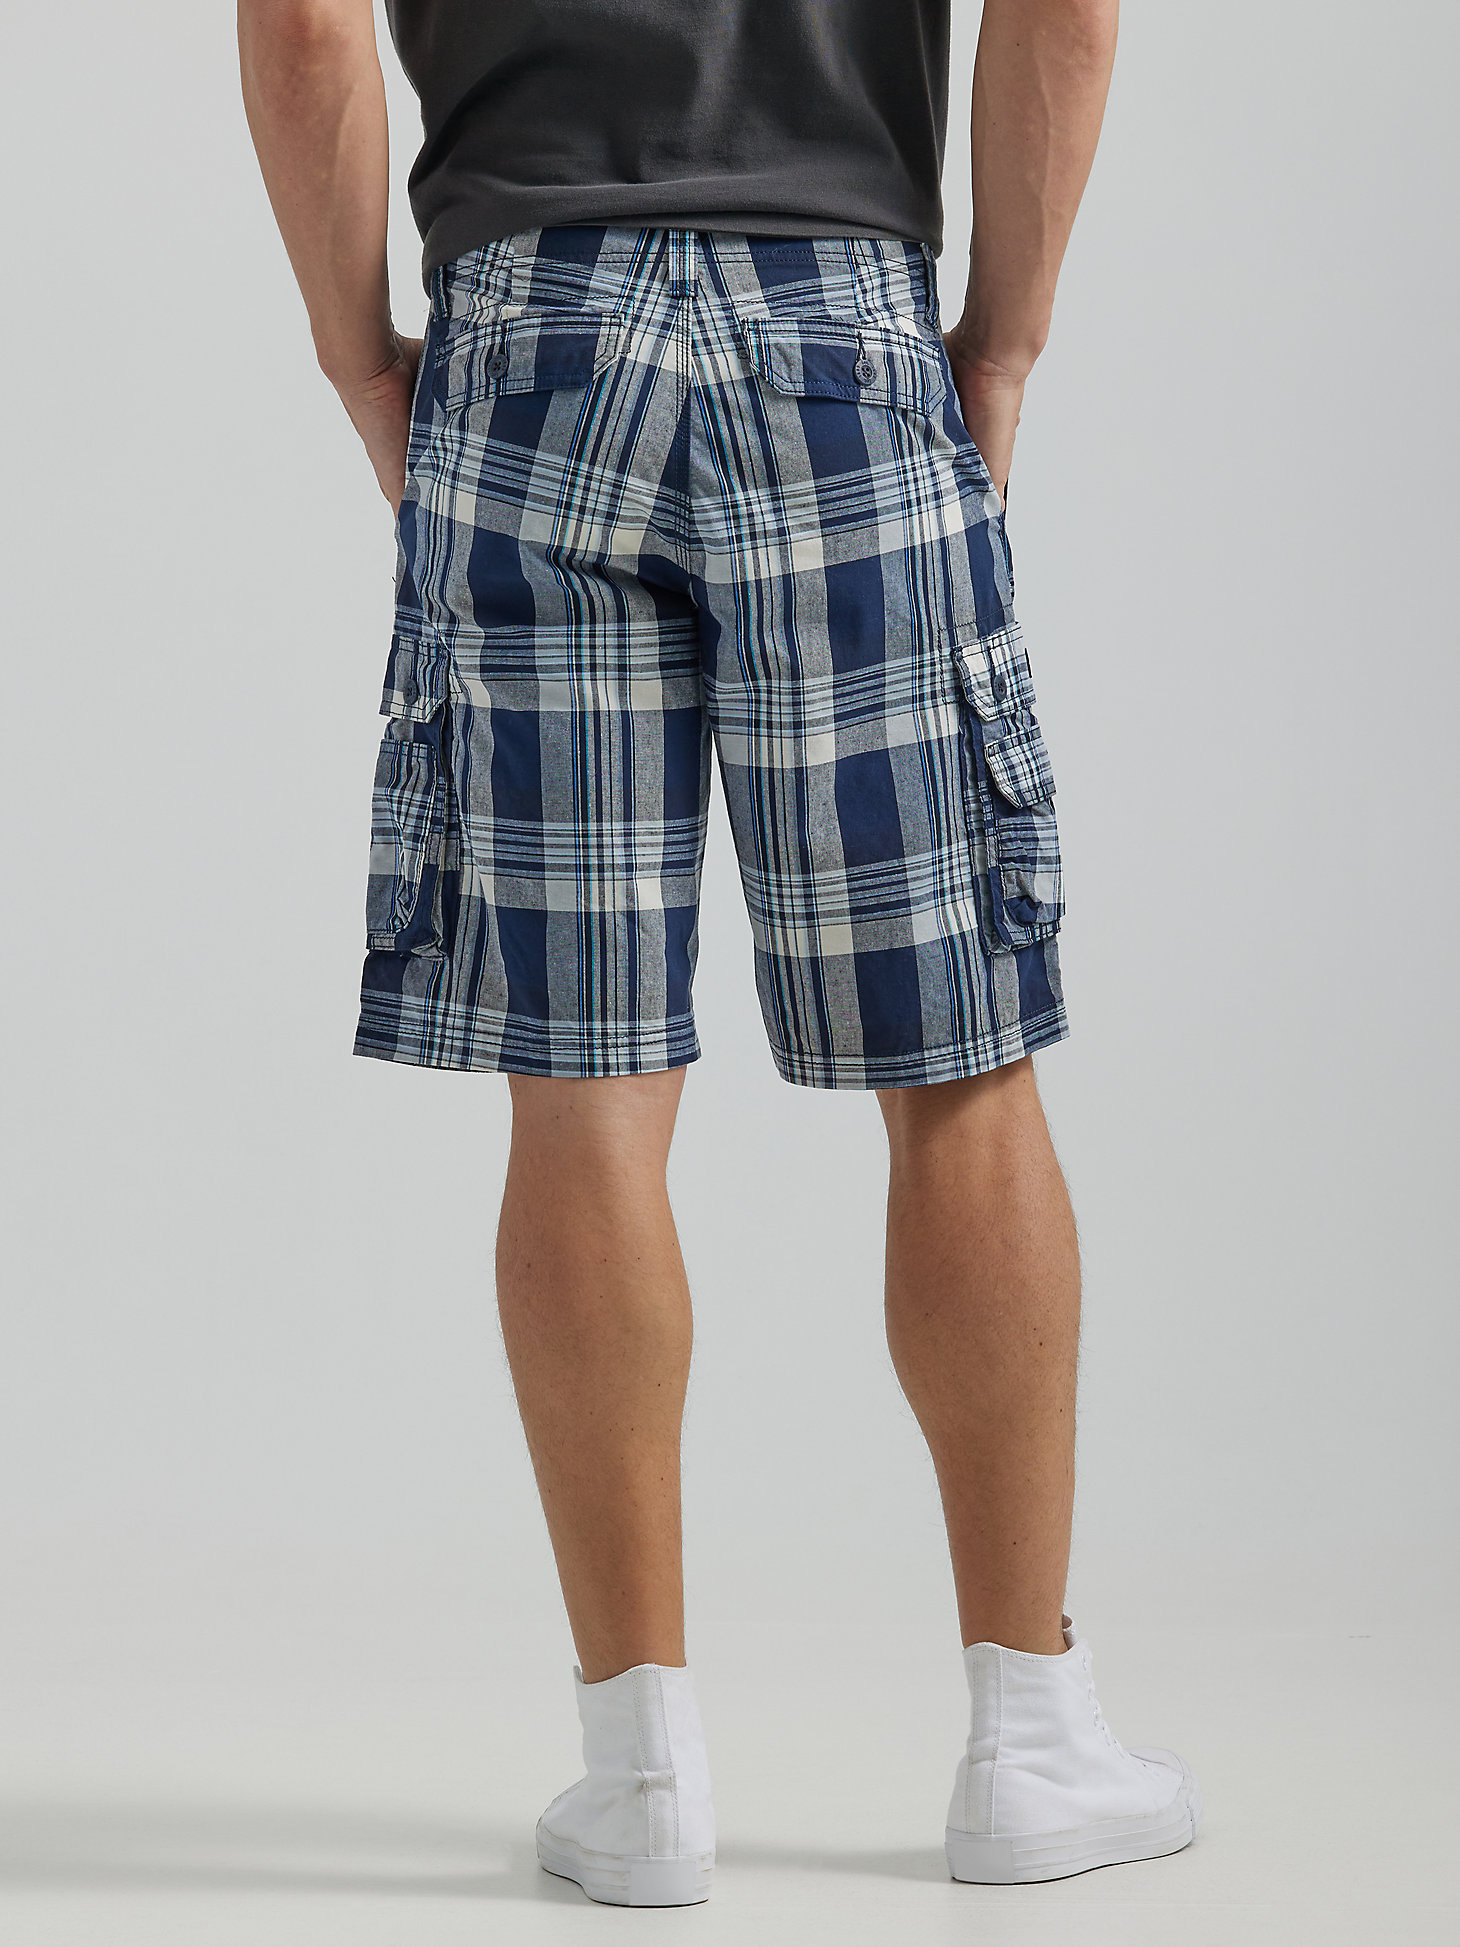 Men's Lee Wyoming Cargo Short in New Blue Plaid alternative view 1